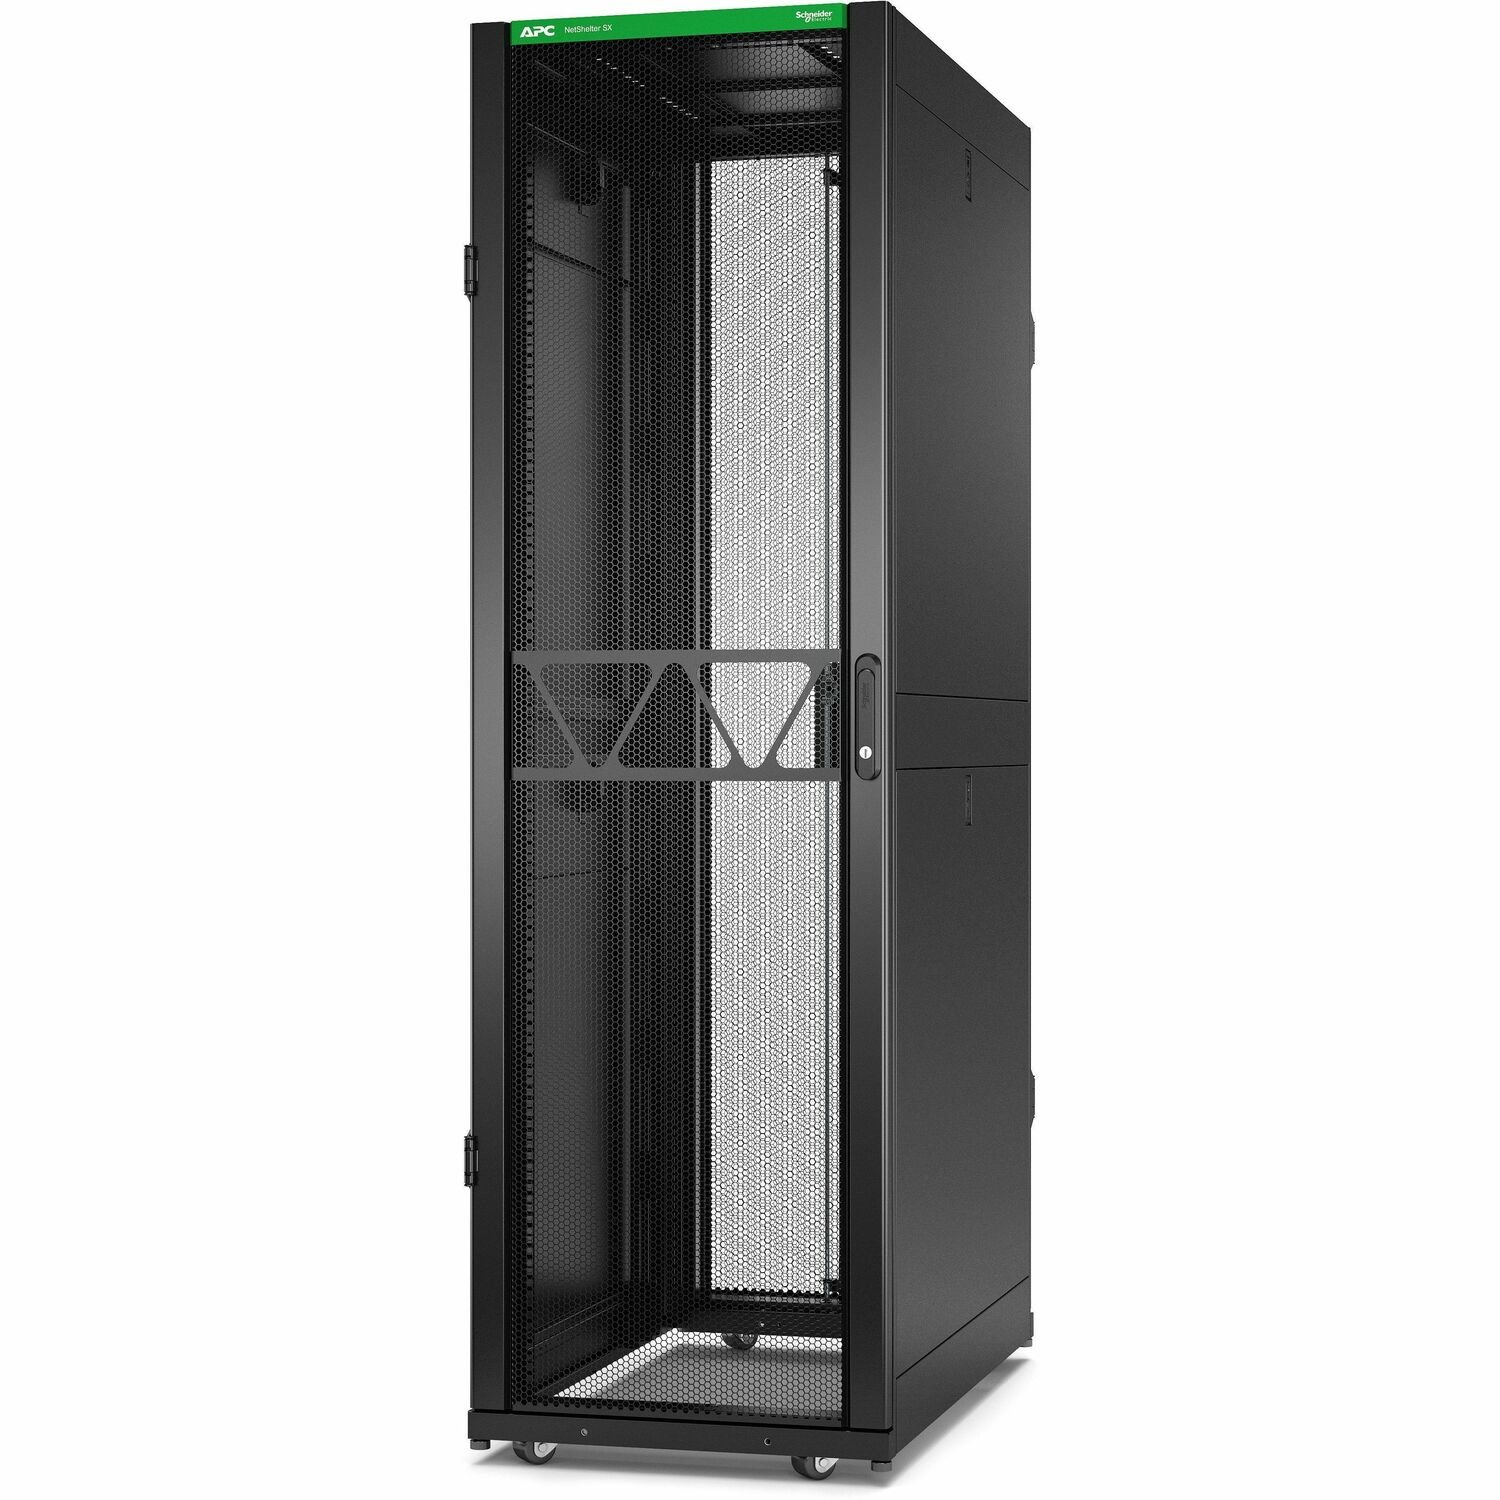 APC by Schneider Electric NetShelter SX 42U Enclosed Cabinet Rack Cabinet for Server, Networking, IT Equipment - 482.60 mm Rack Width - Black